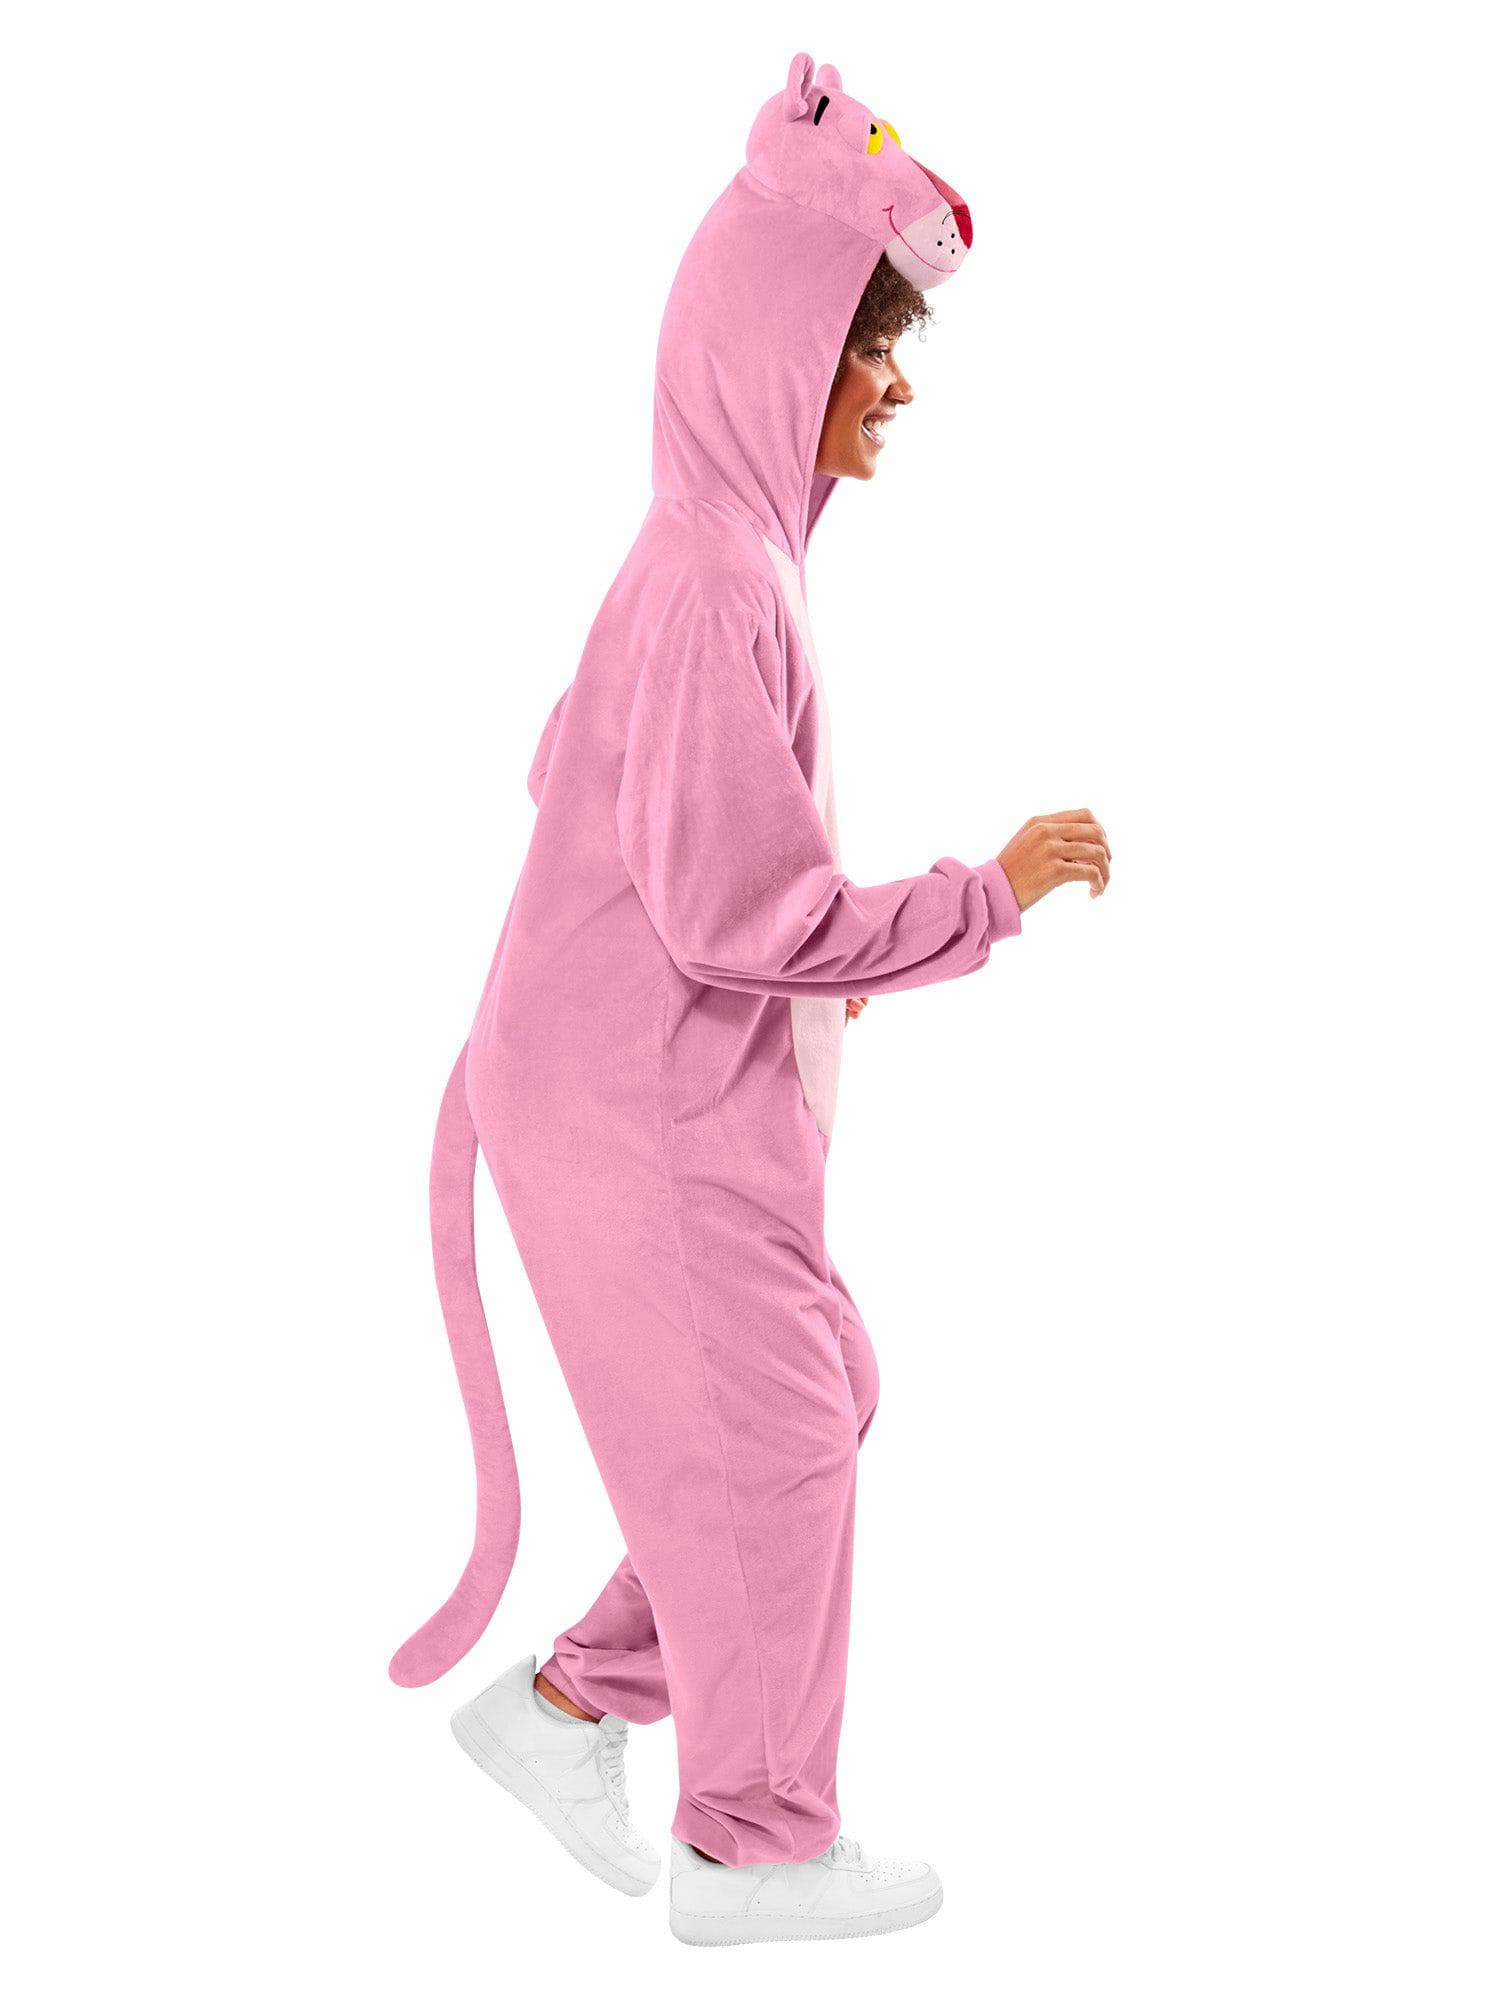 Pink Panther Adult Comfywear Costume - costumes.com